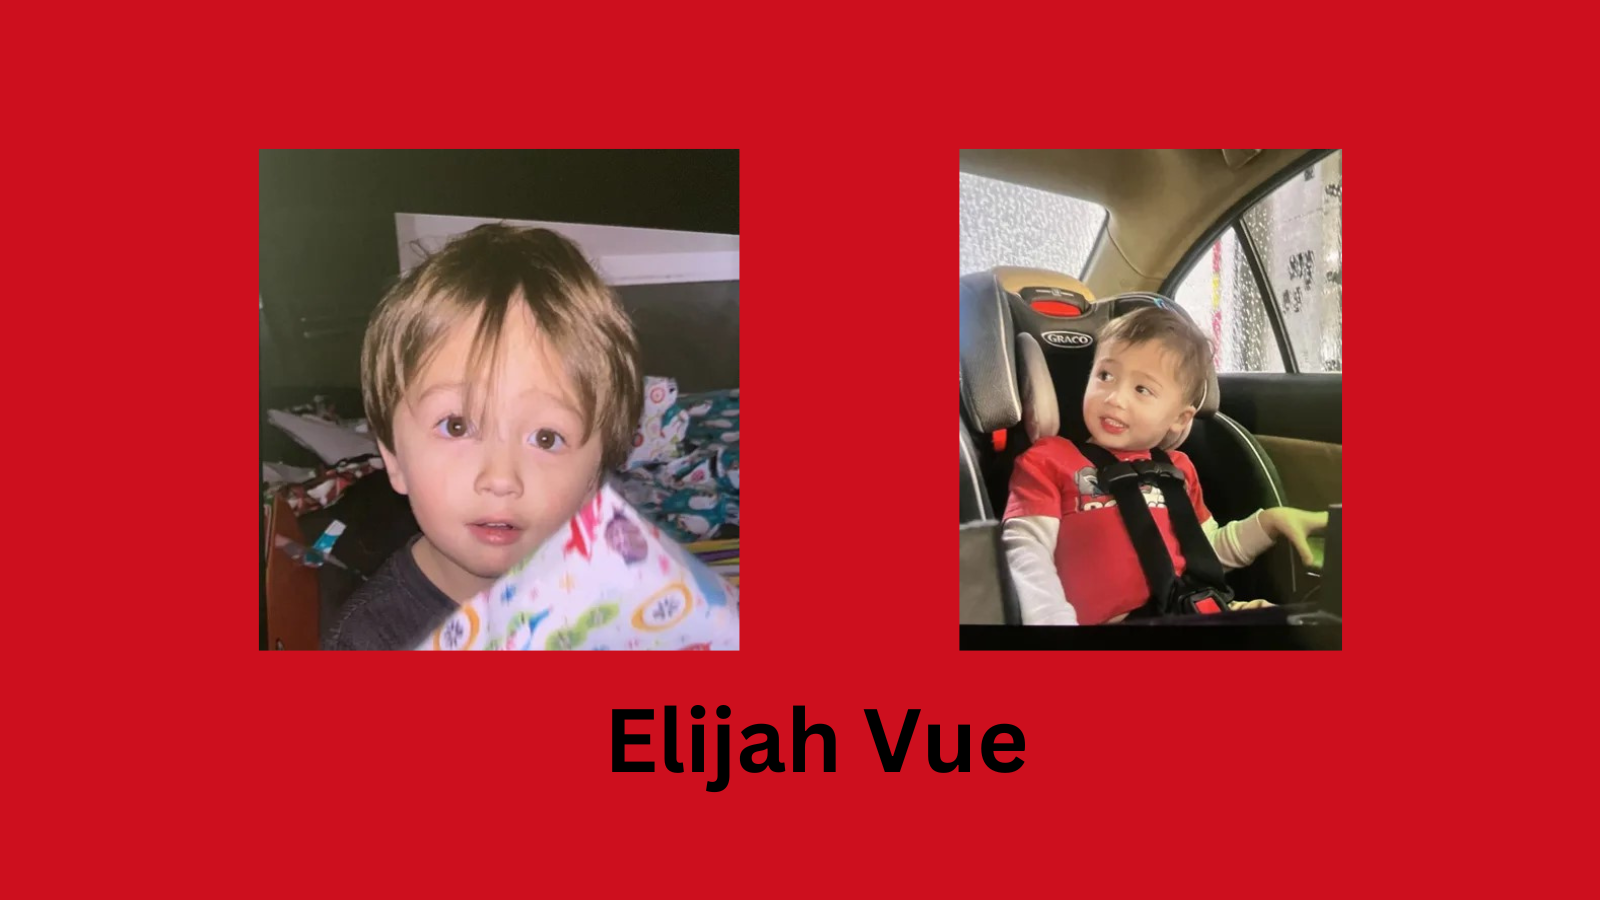 The search for Elijah Vue enters its second Week